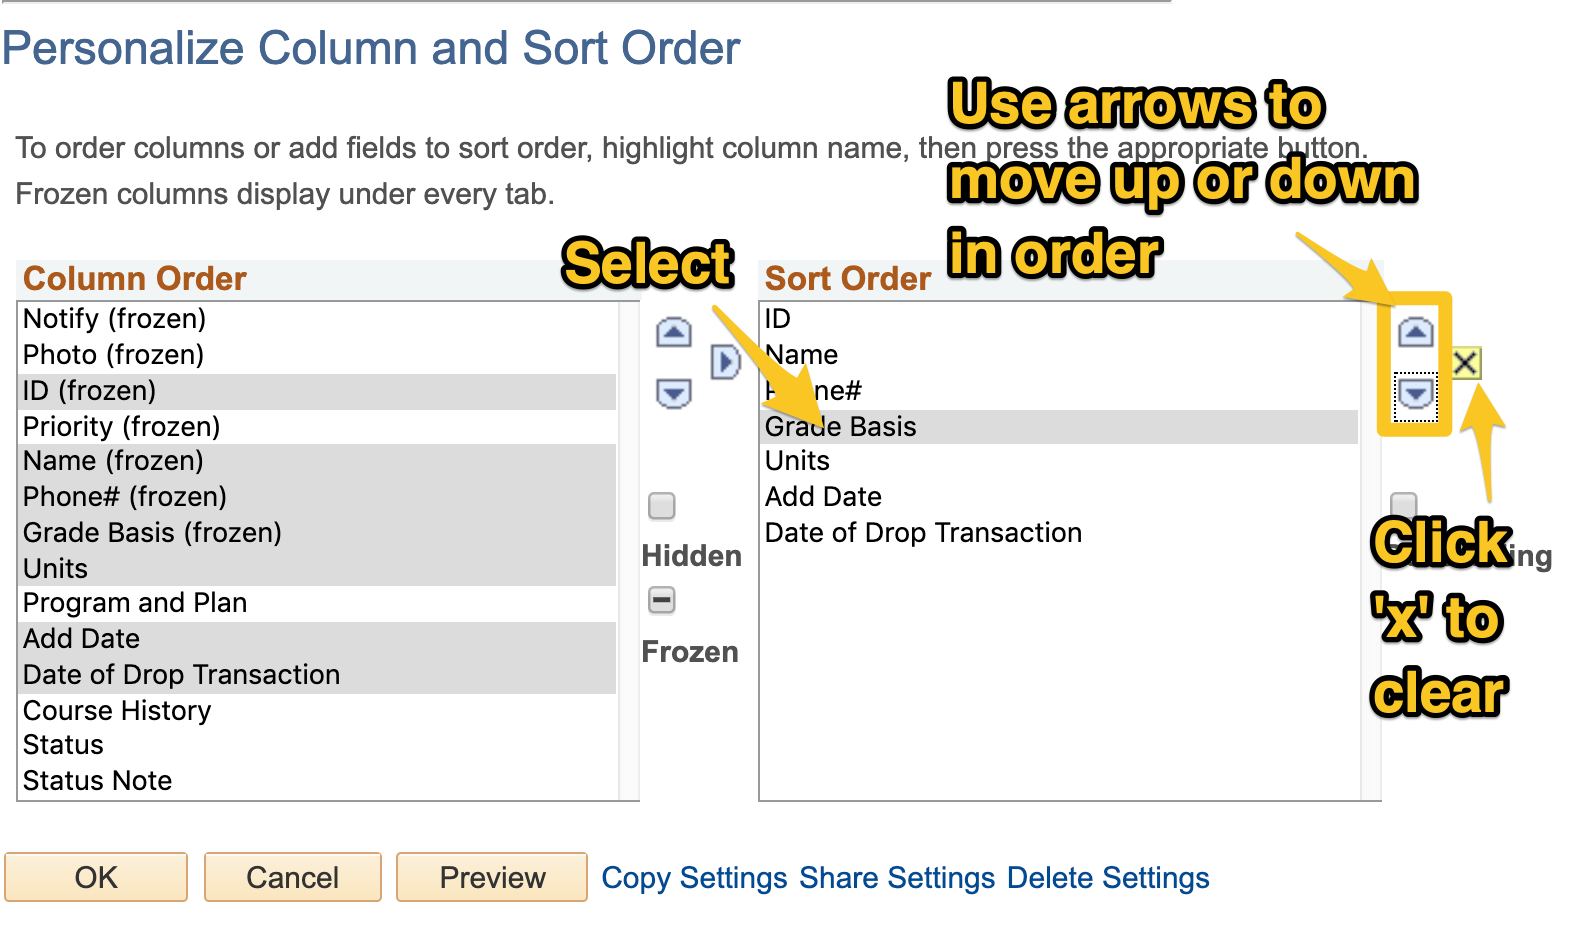 Once columns appear in the Sort Order table, use the up and down arrows to the right of the table to reorder the columns.